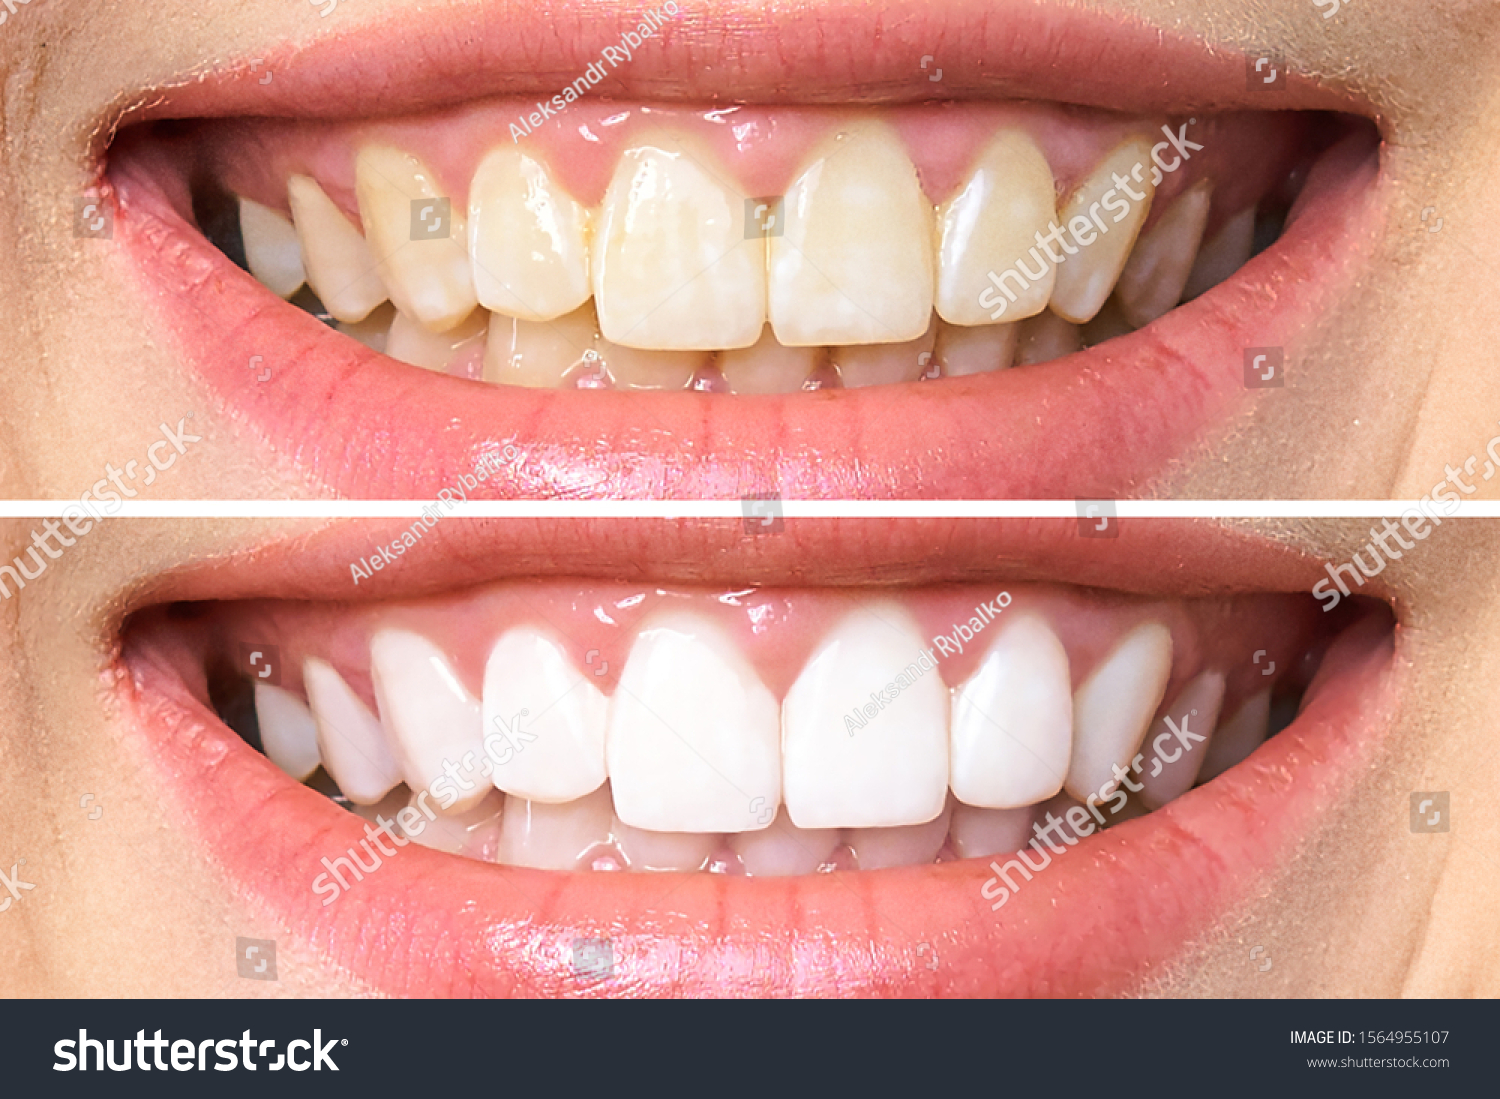 woman teeth before and after whitening. Over white background. Dental clinic patient. Image symbolizes oral care dentistry, stomatology. #1564955107